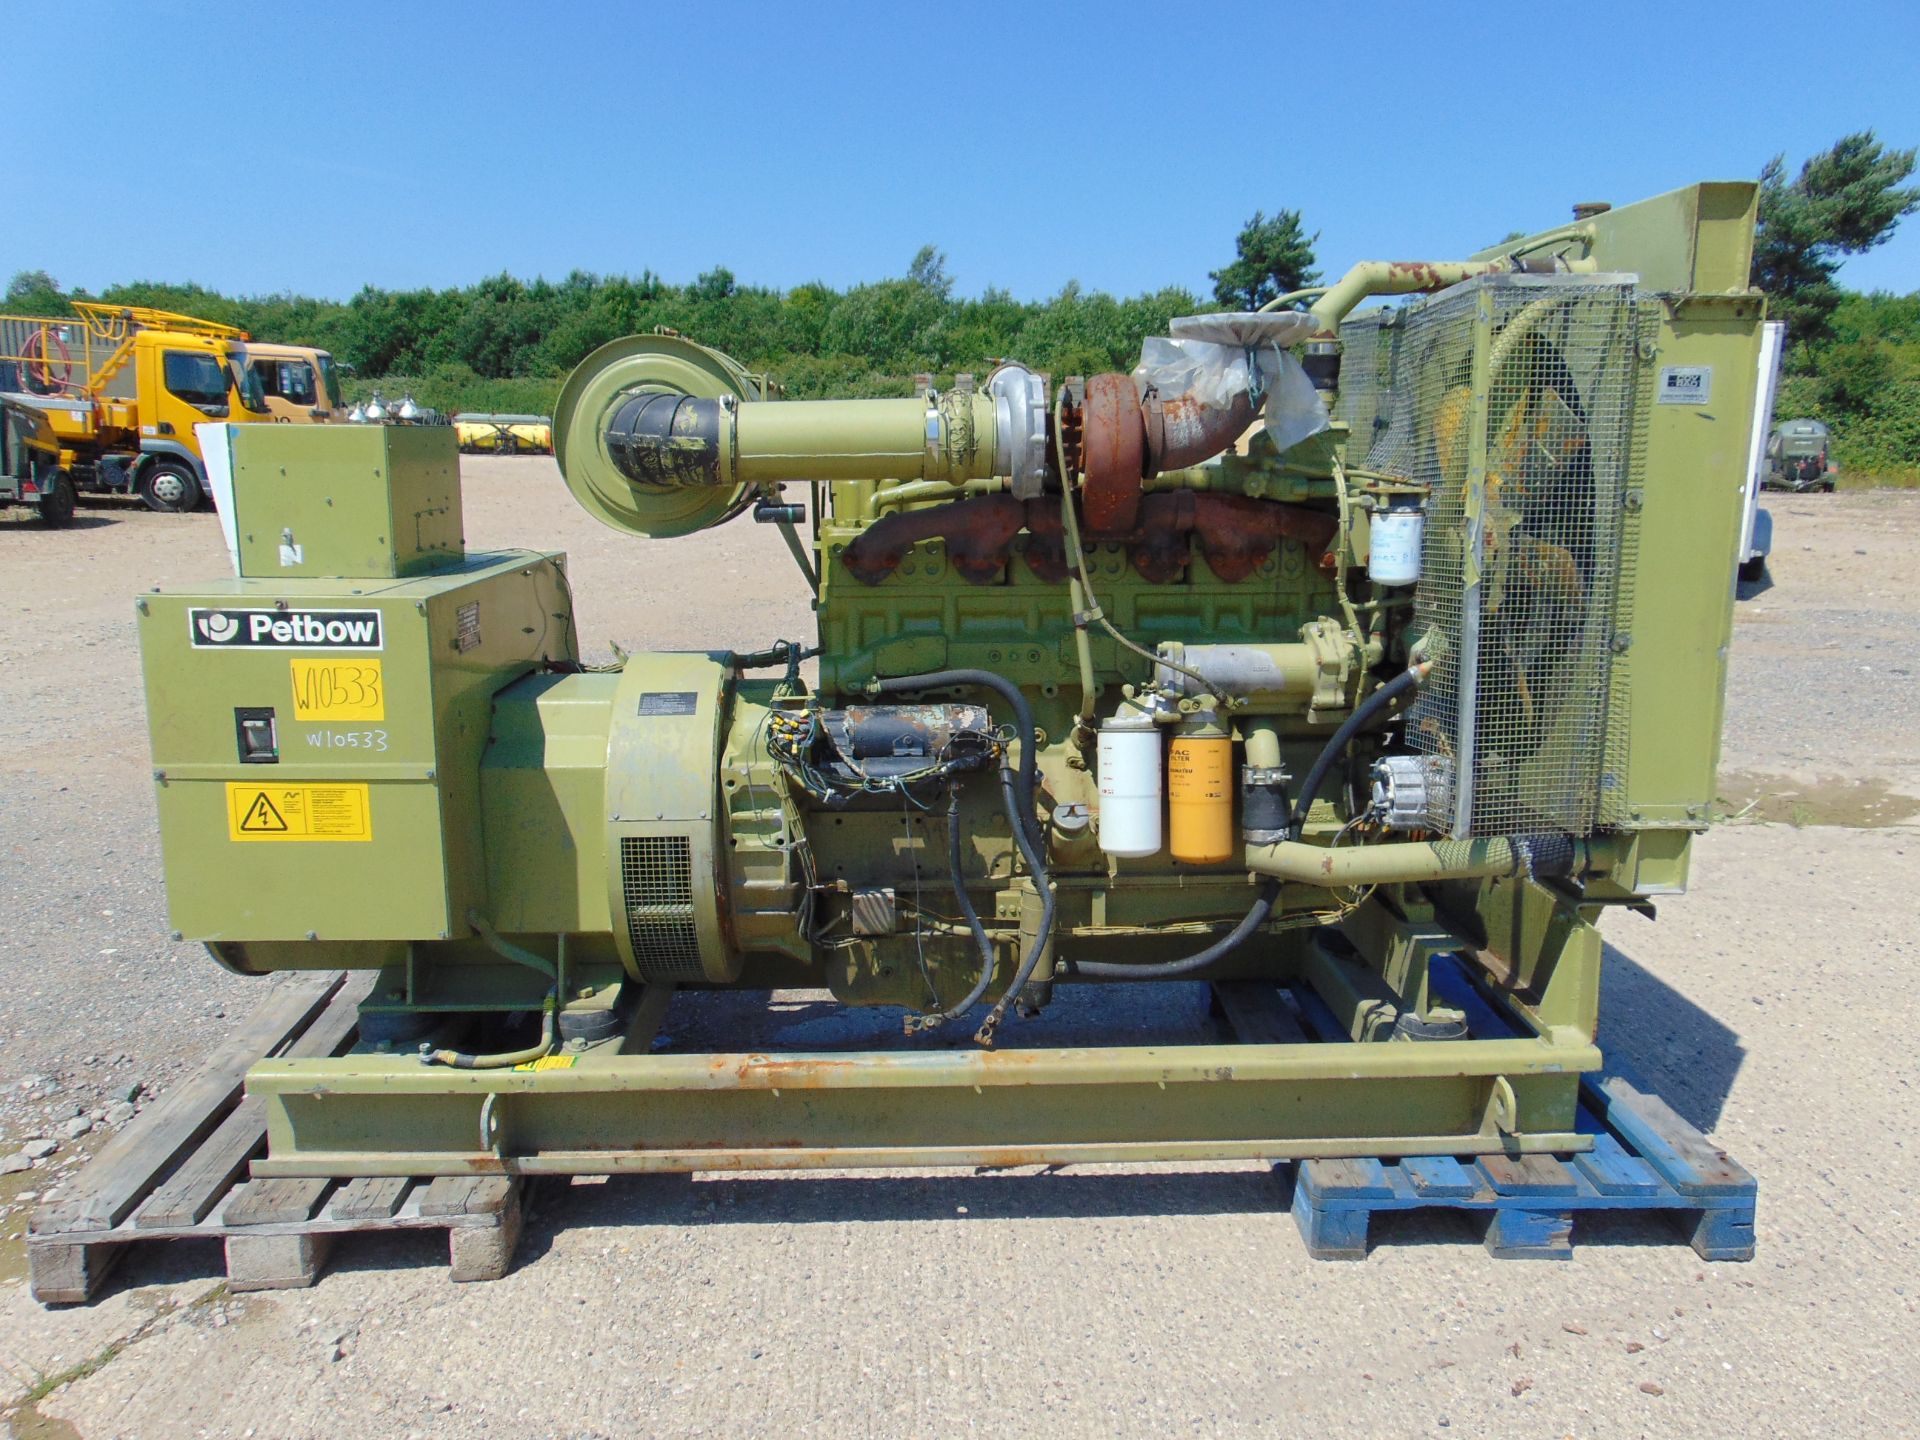 Ex Reserve Petbow BP204 255 KVA Skid Mounted Generator c/w Cummins Engine ONLY 2,122 HOURS!